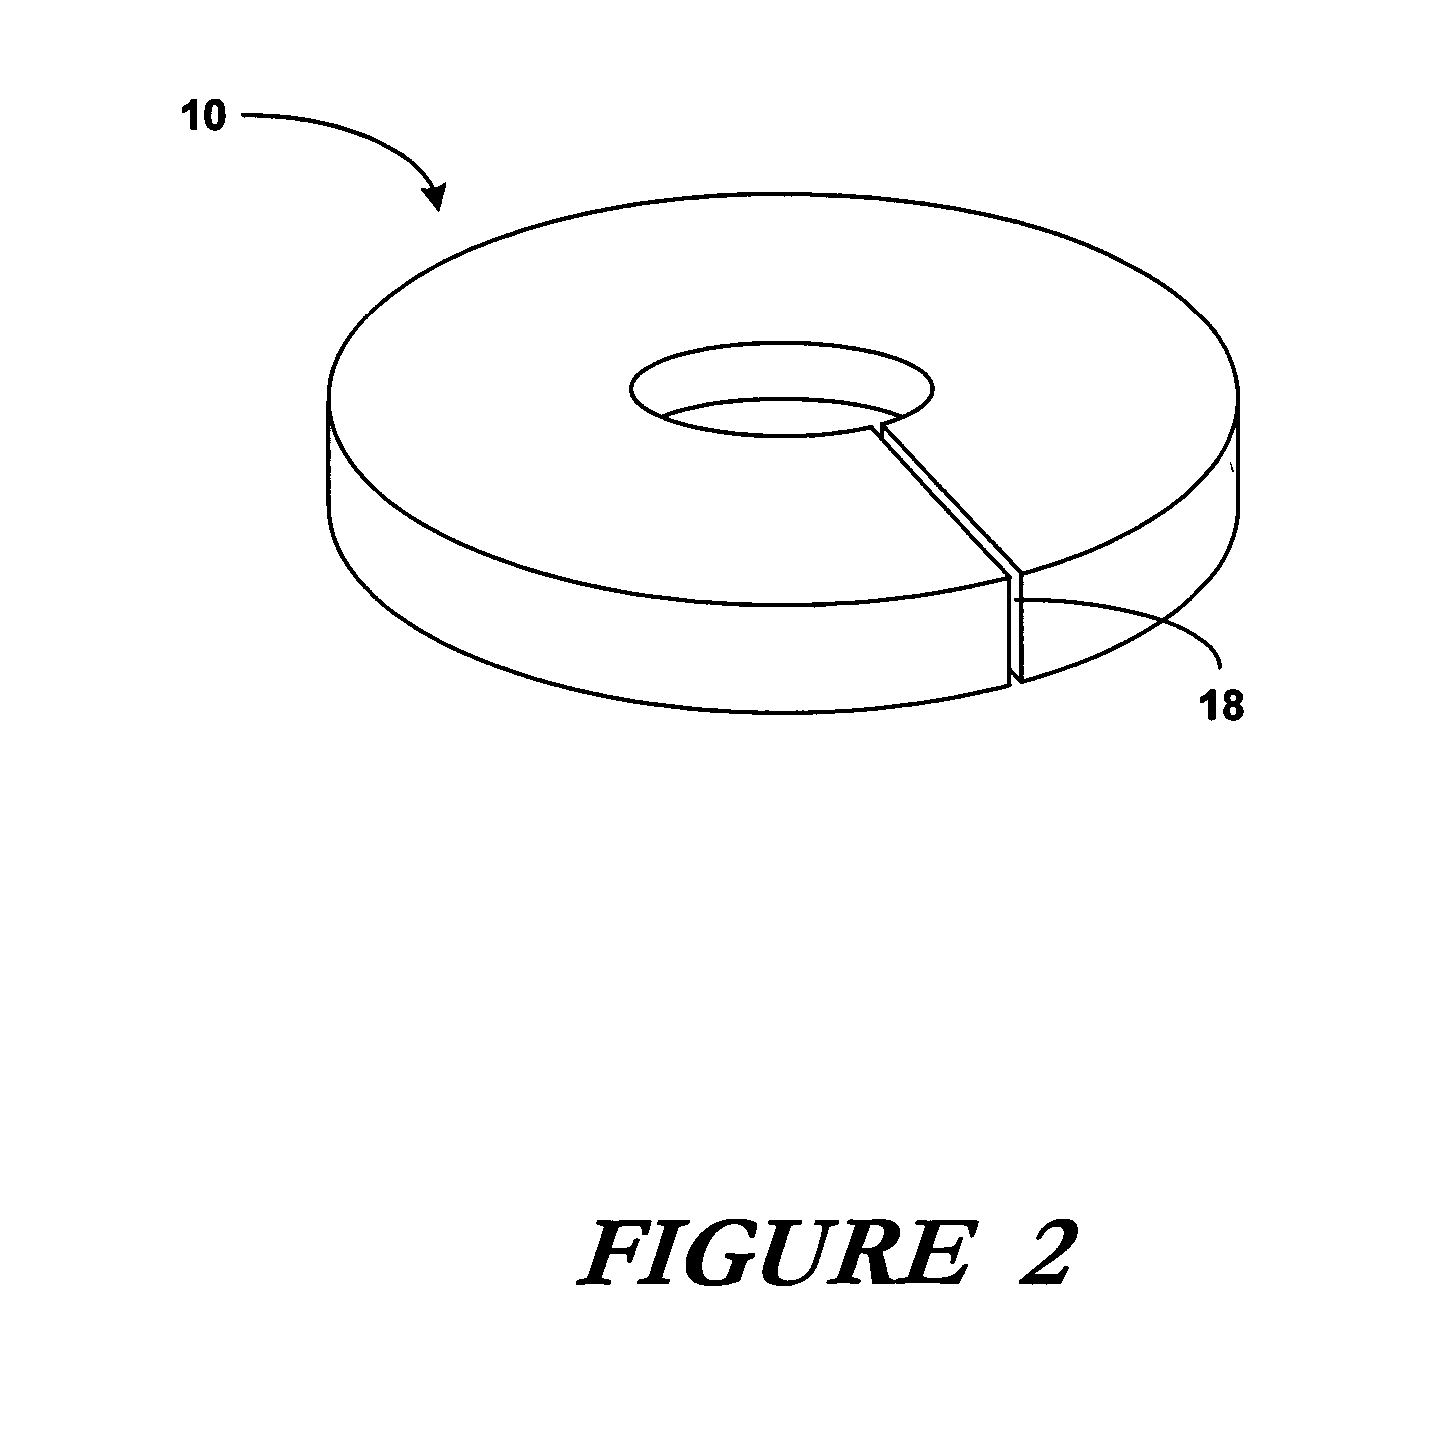 Apparatus and methodologies for fertilization, moisture retention, weed control, and seed, root, and plant propagation